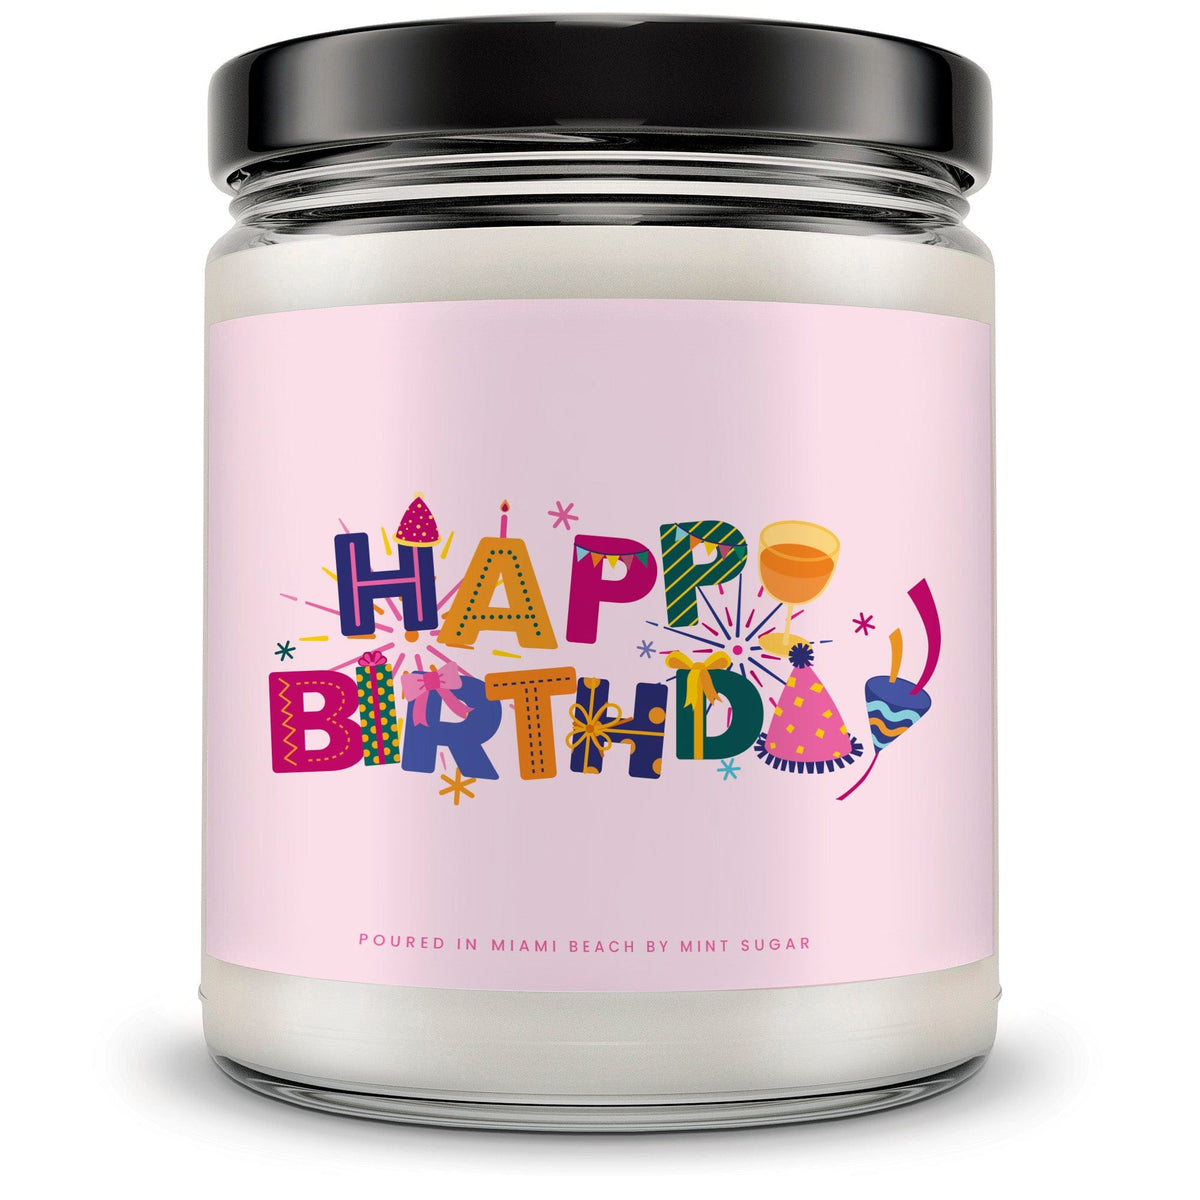 Super Happy Birthday Candle - Mint Sugar Candle